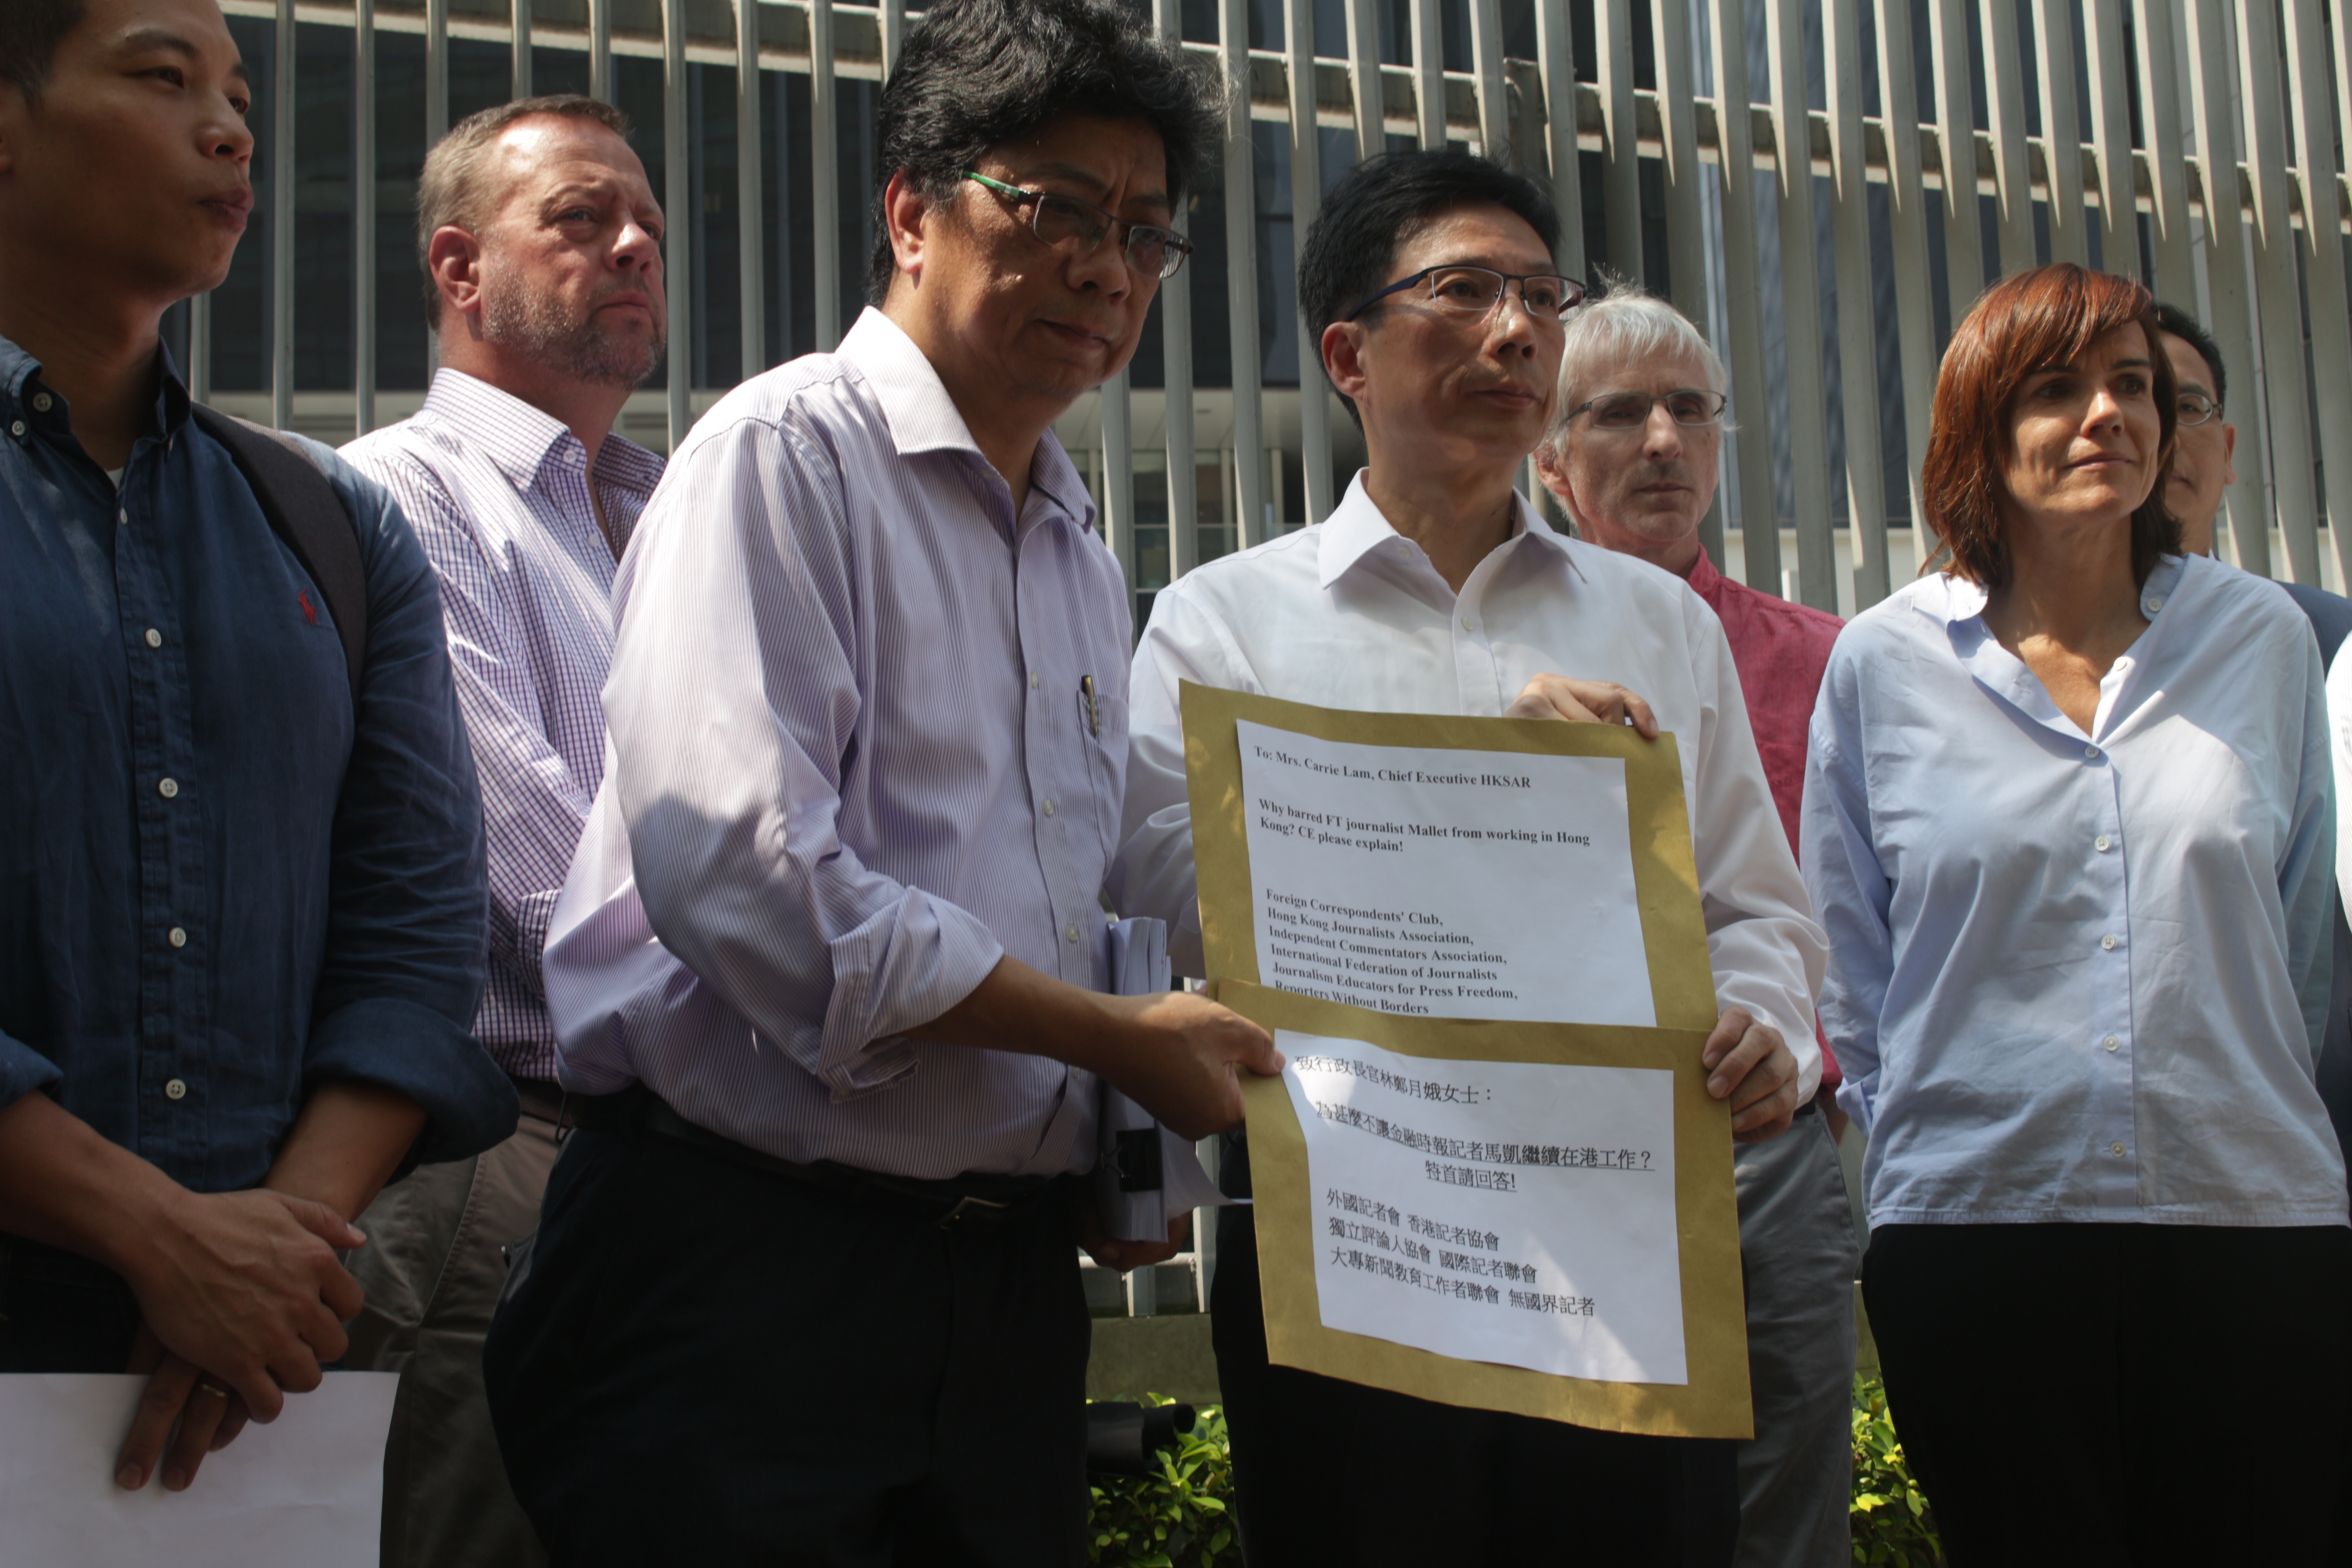 HKJA chairman Chris Yeung hands a petition bearing 15,000 signatures from people demanding the government explain why Victor Mallet’s visa was not renewed. Photo by Vicky Wong.